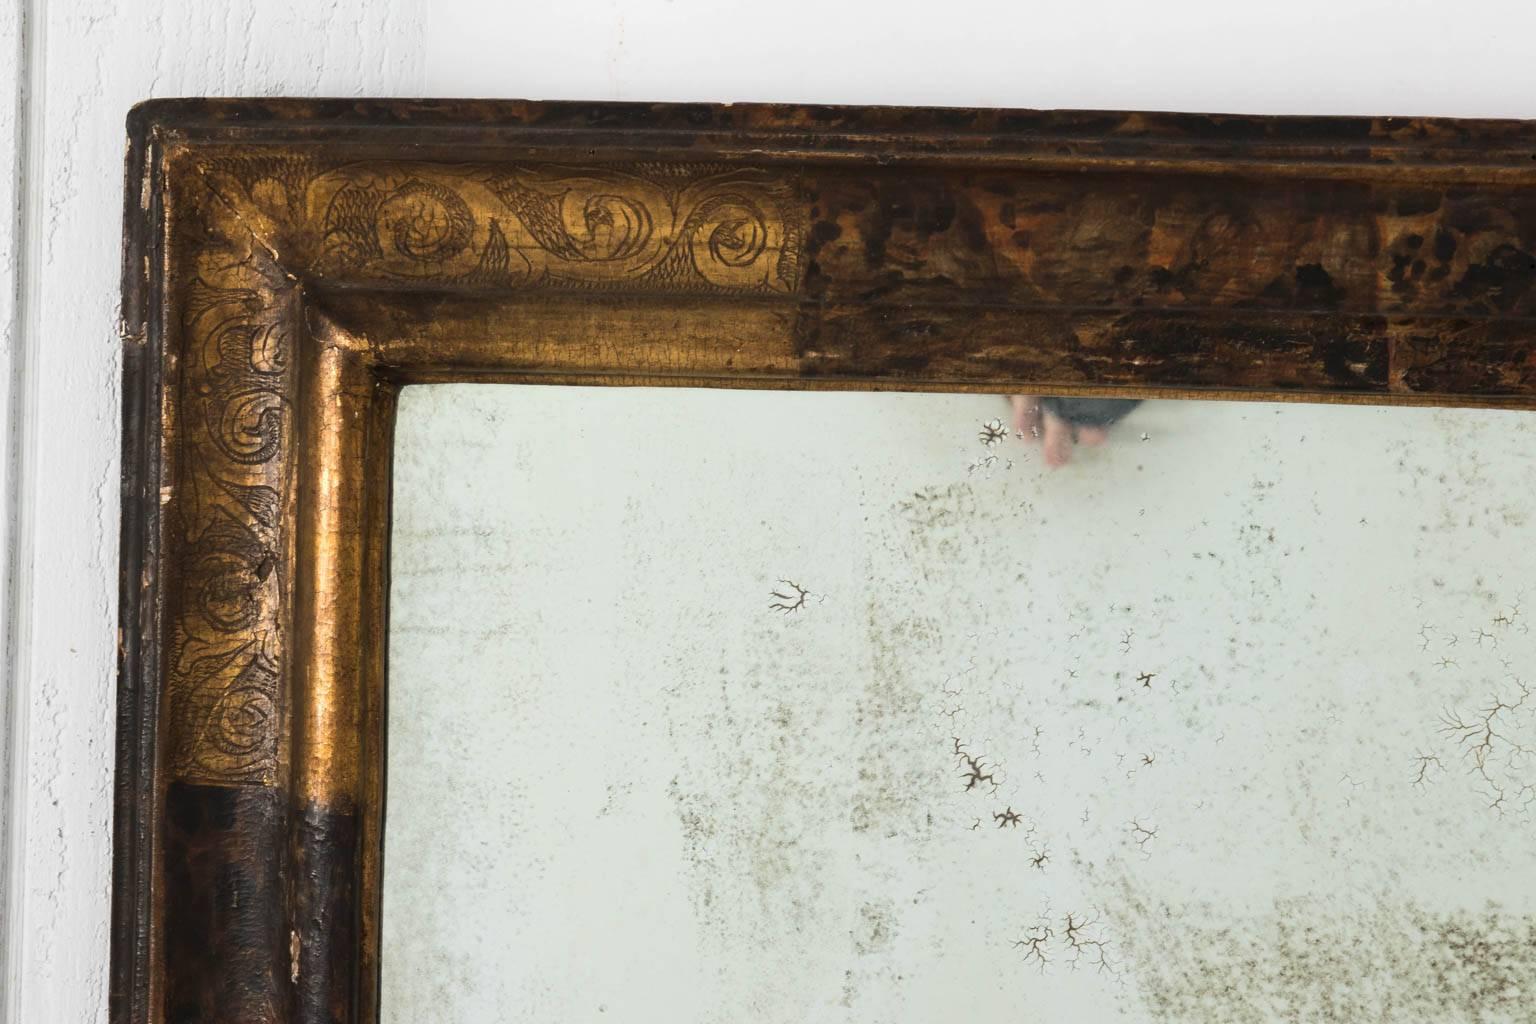 Gilded Italian mirror with hand-painted S-scroll foliage detailed on the corners, circa early 19th century.
 